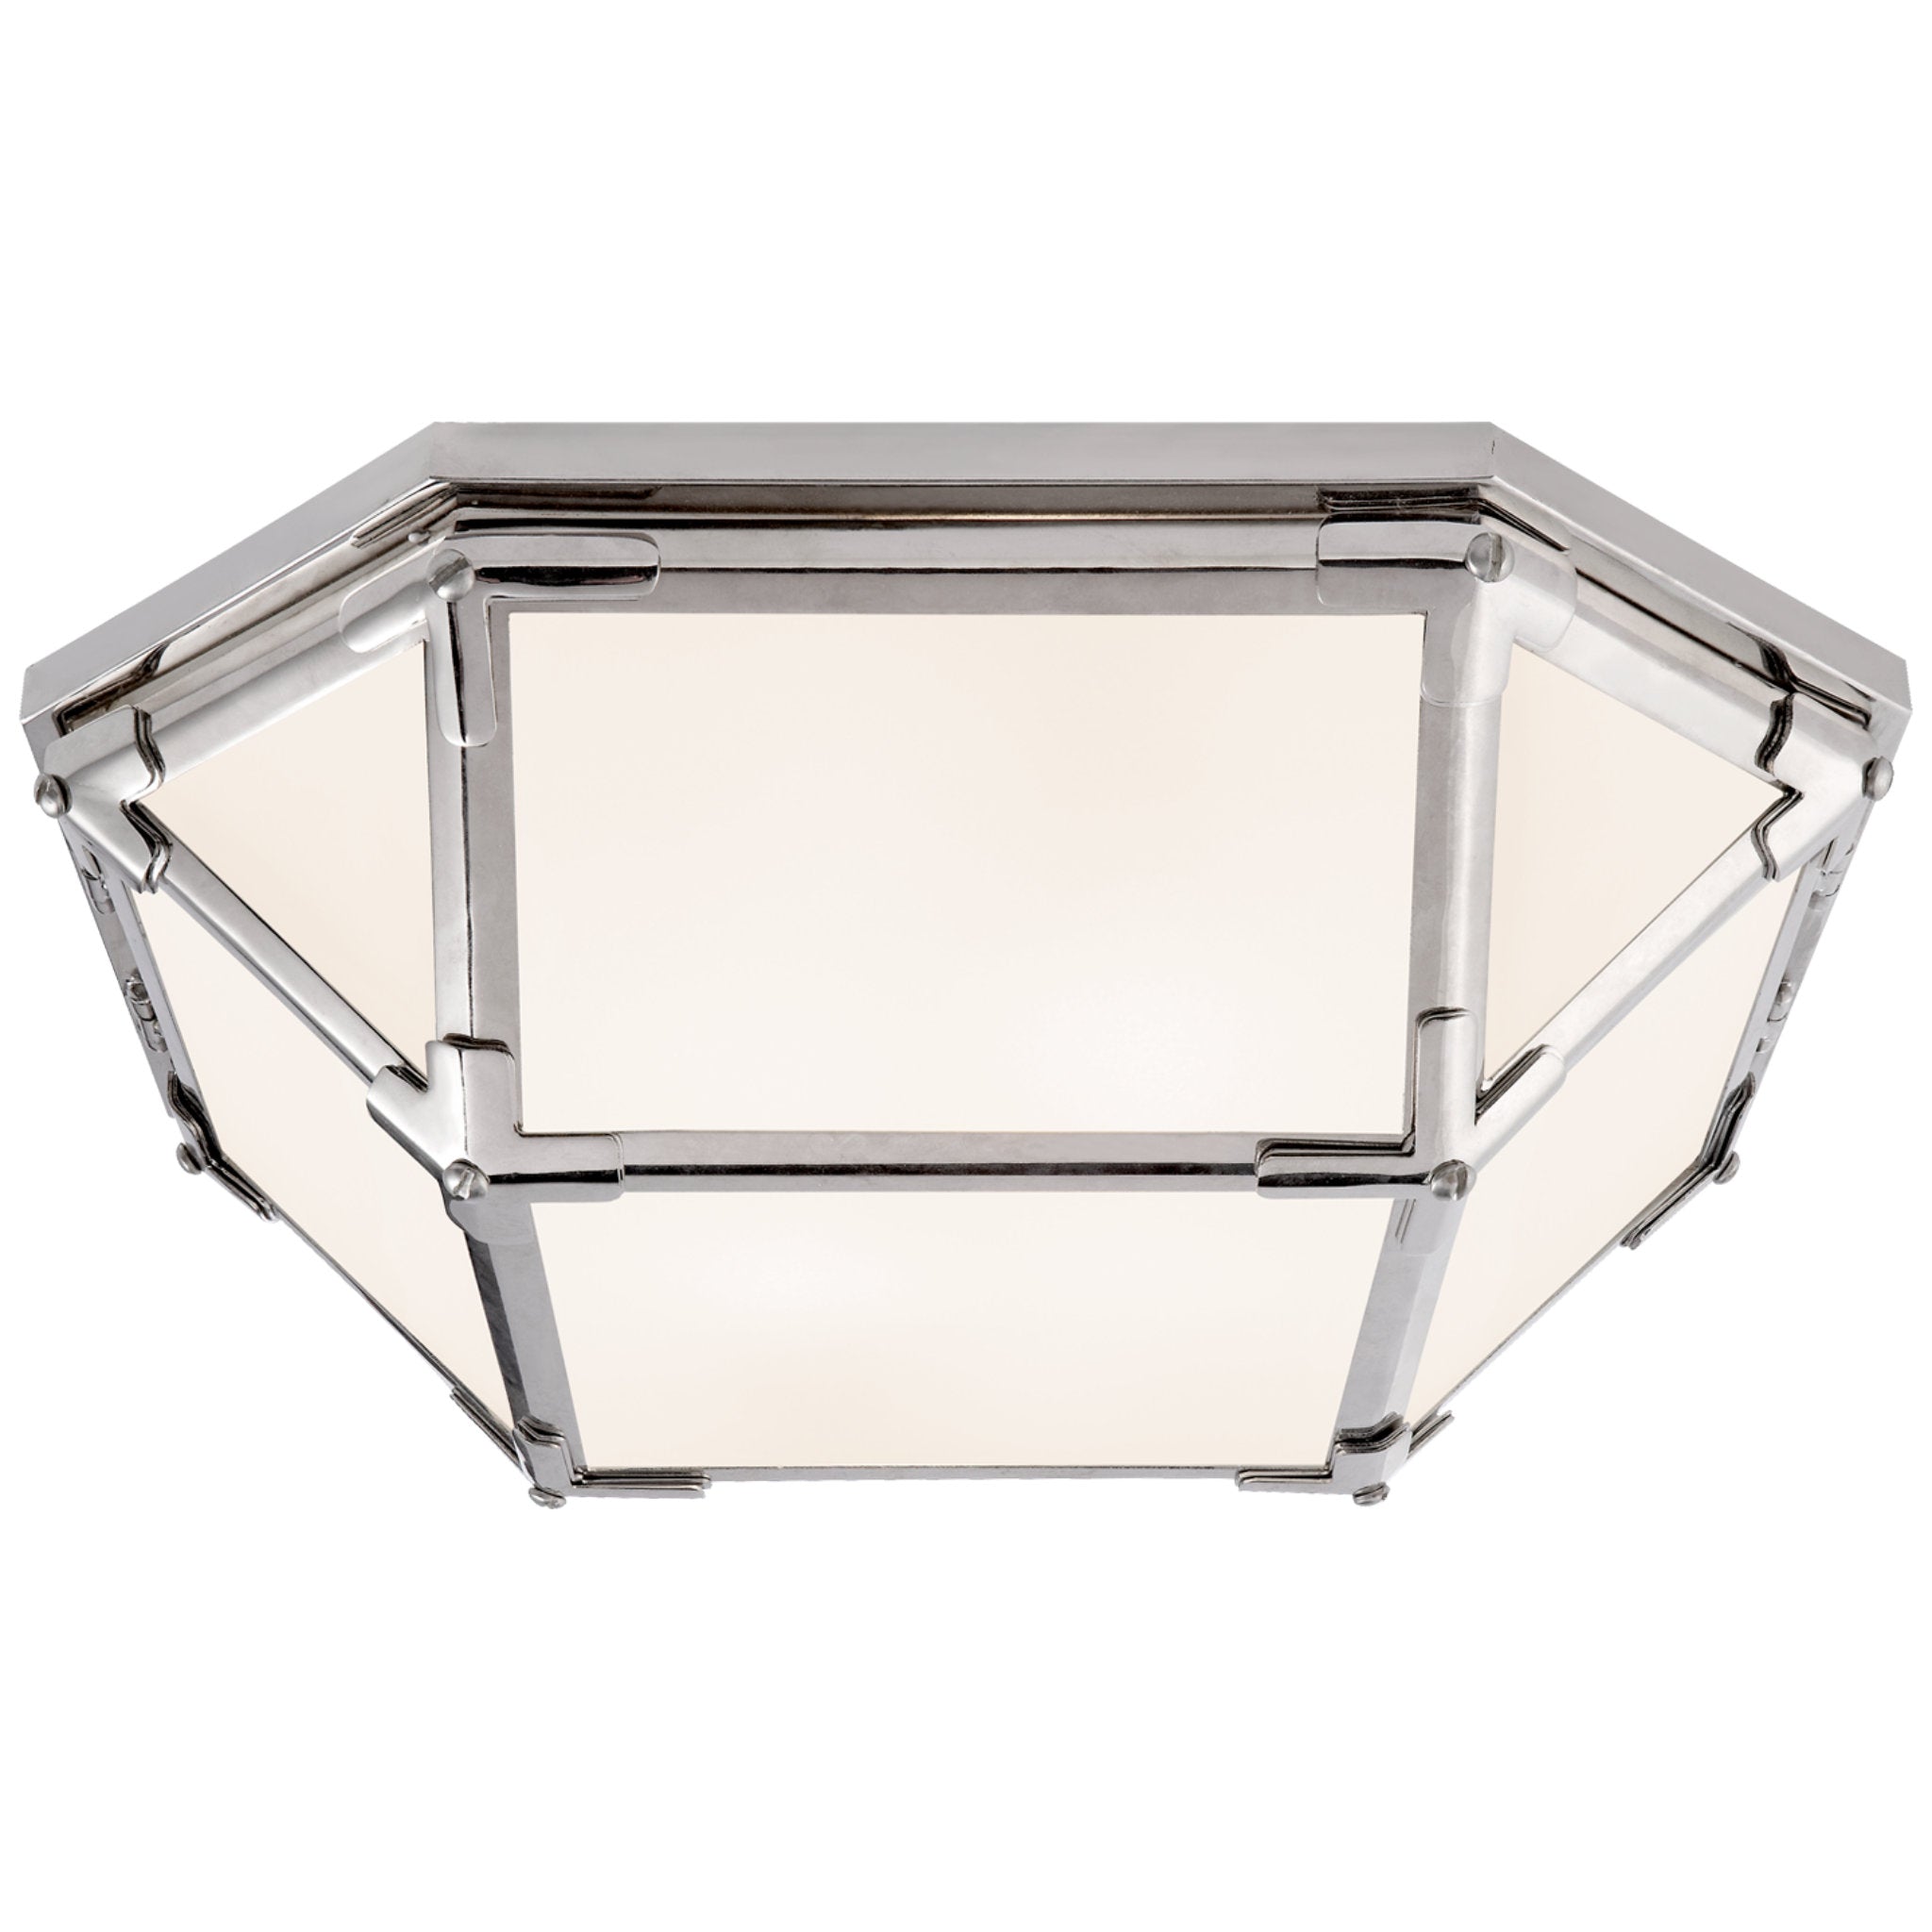 Suzanne Kasler Morris Flush Mount in Polished Nickel with White Glass